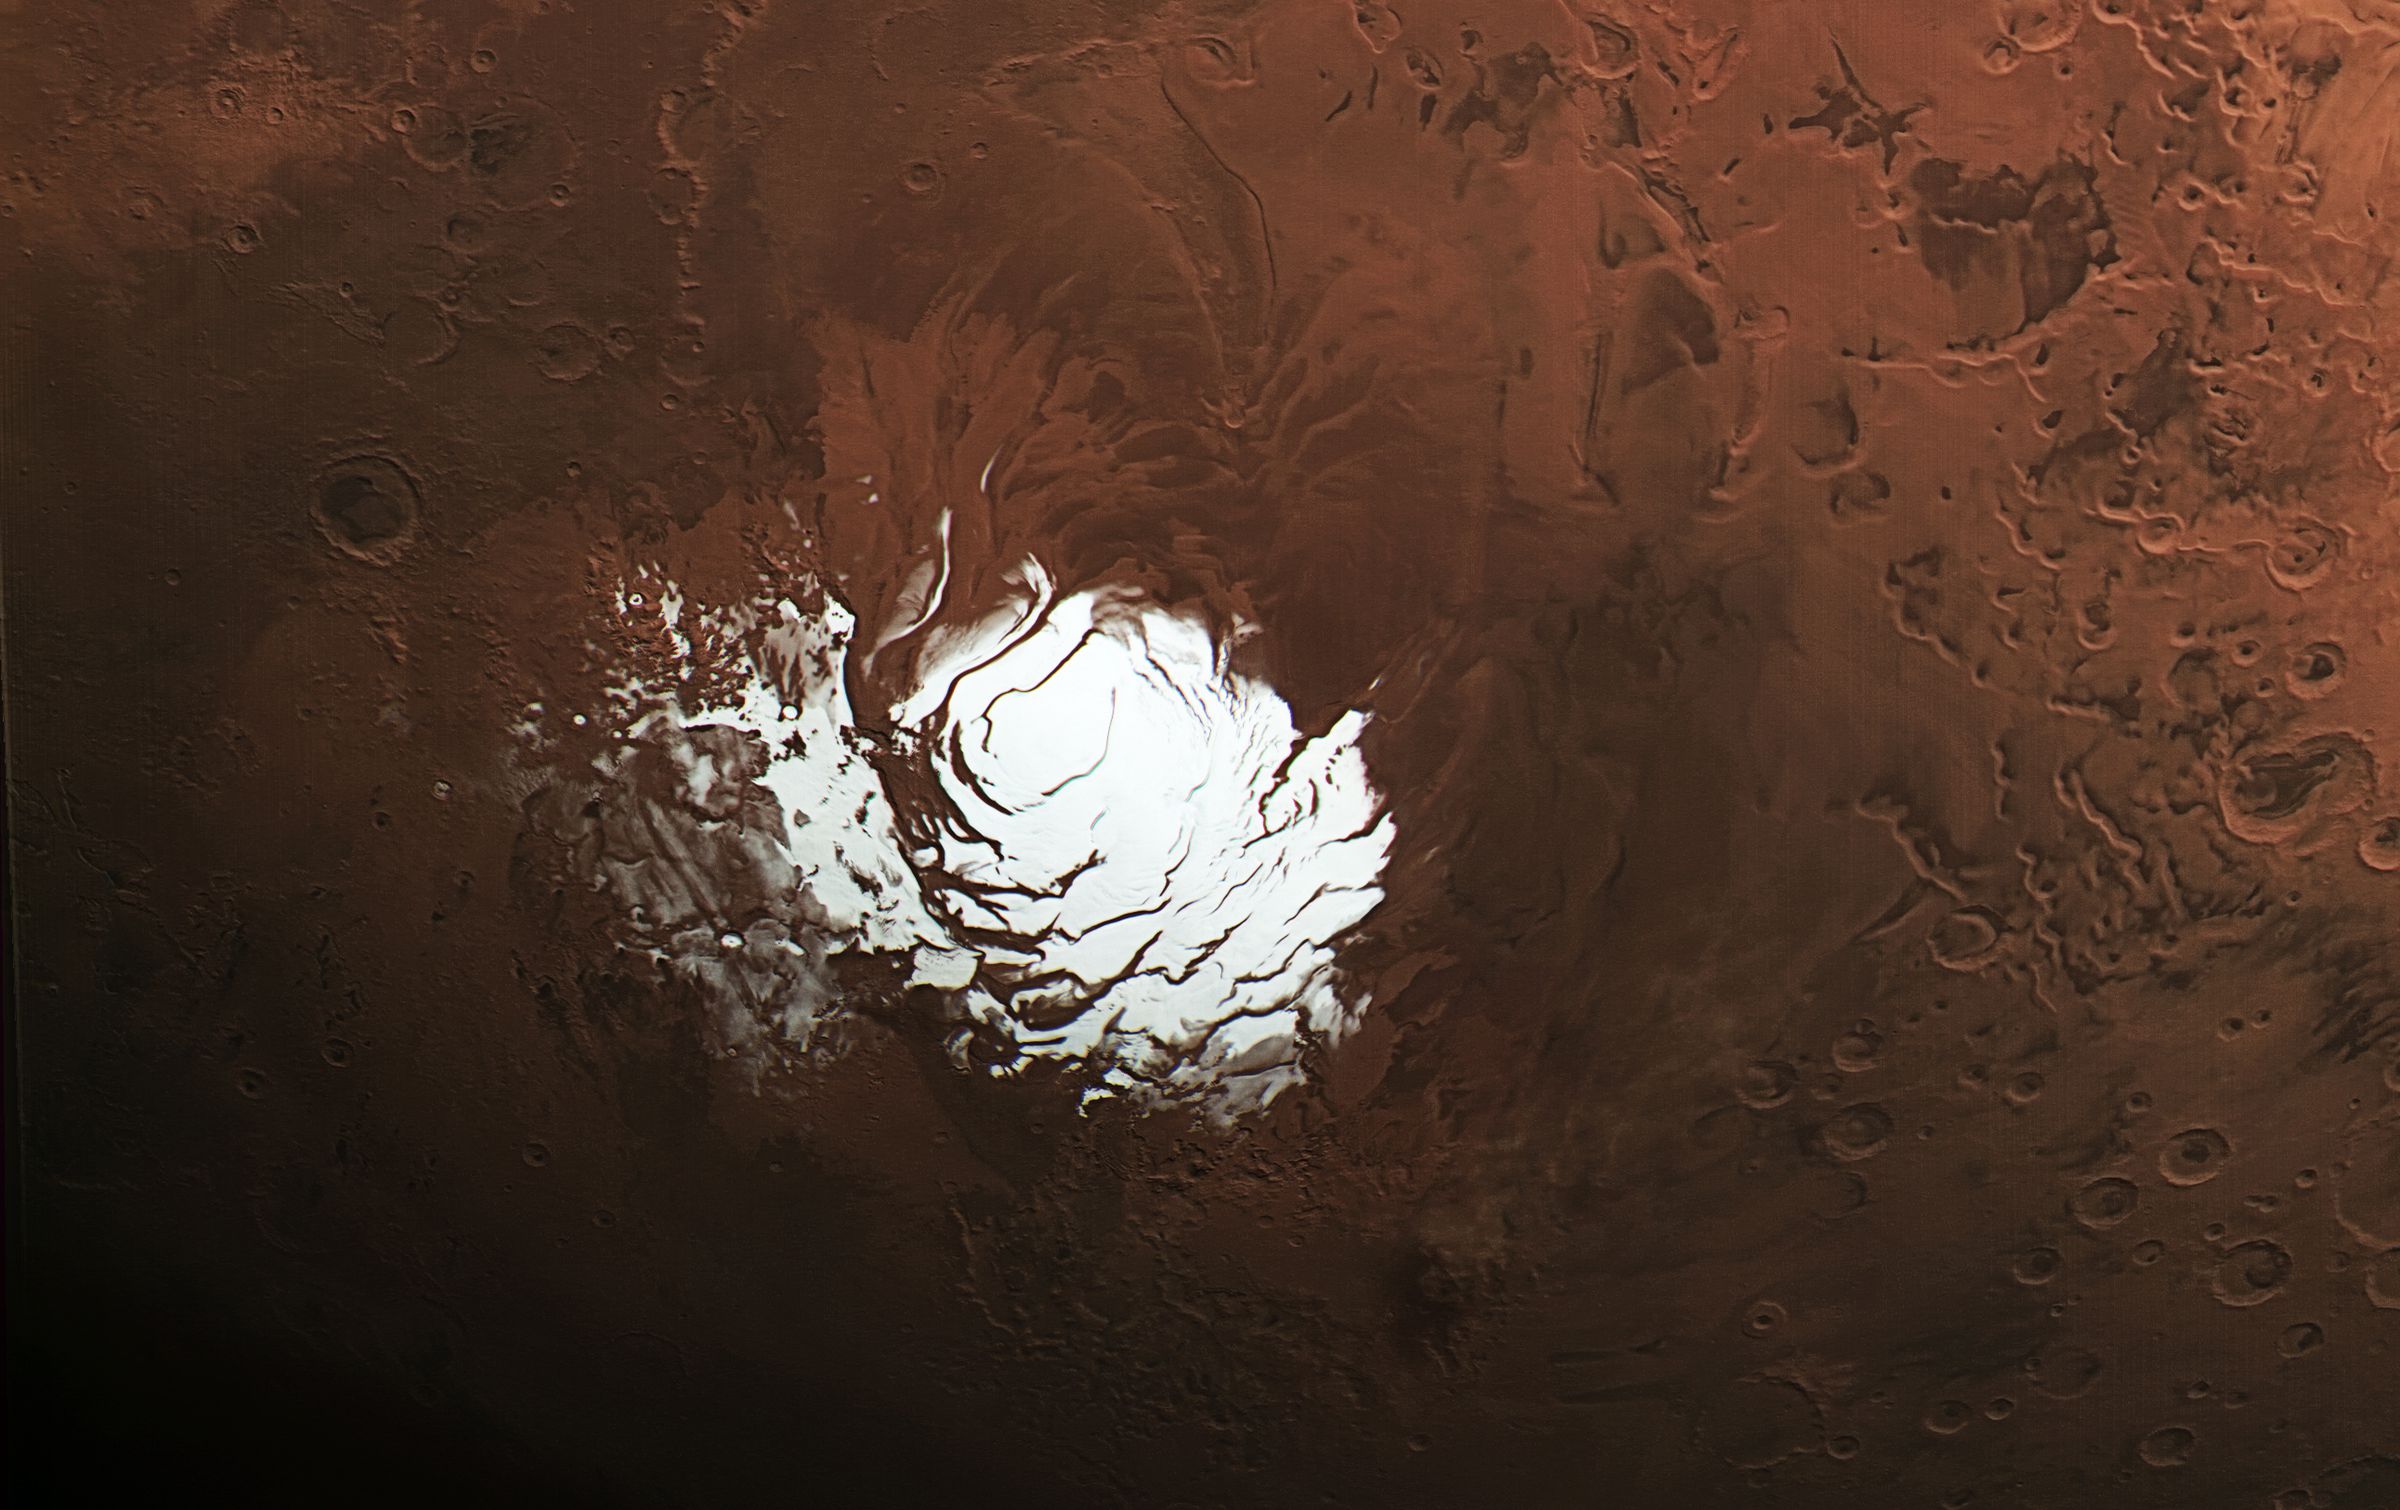 Mars’ south pole, as seen from Mars Express.